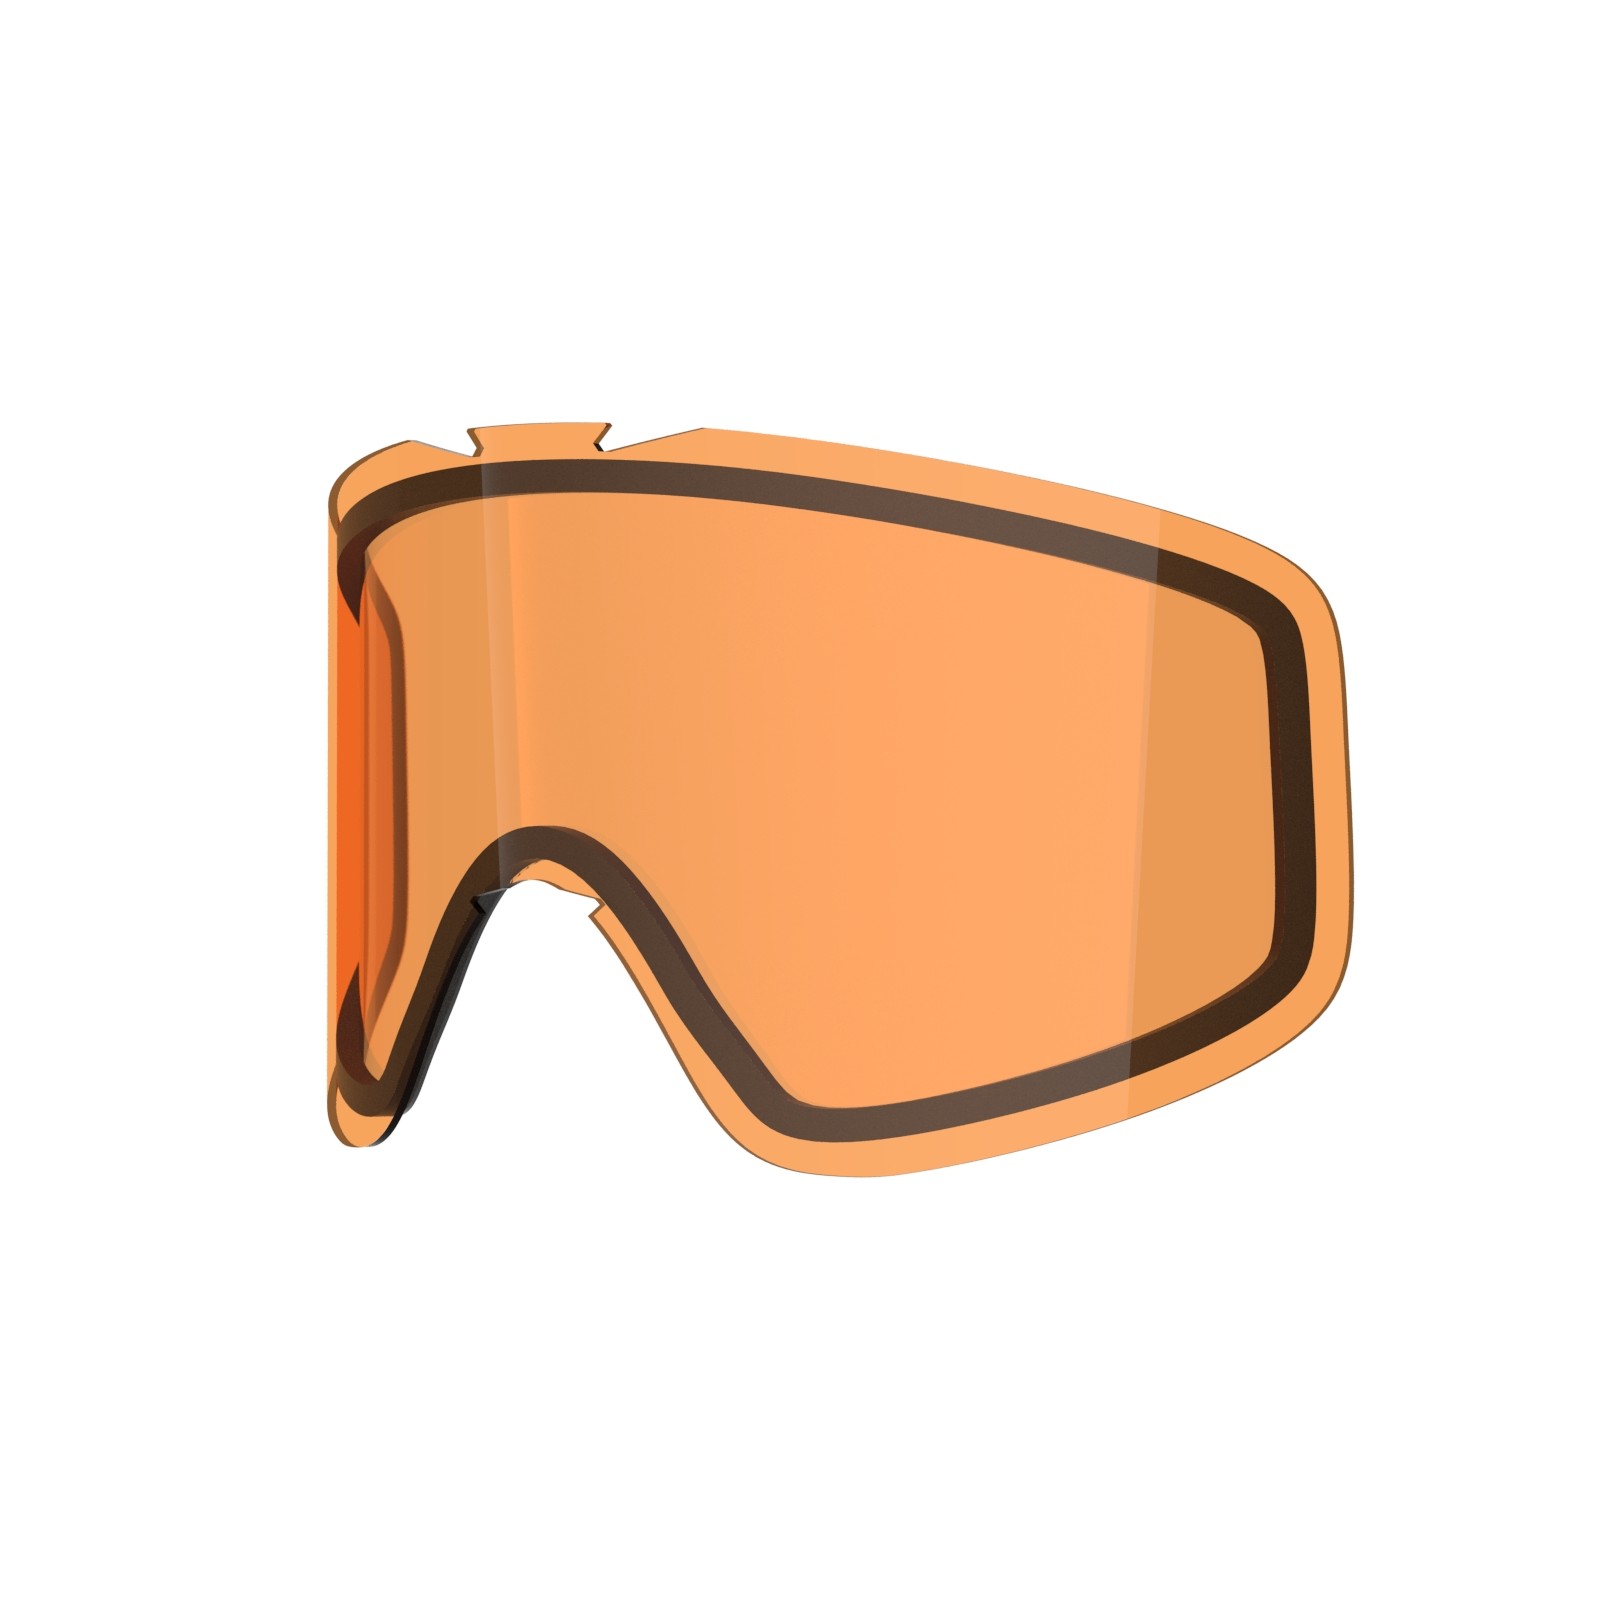 Persimmon lens for Flat goggle